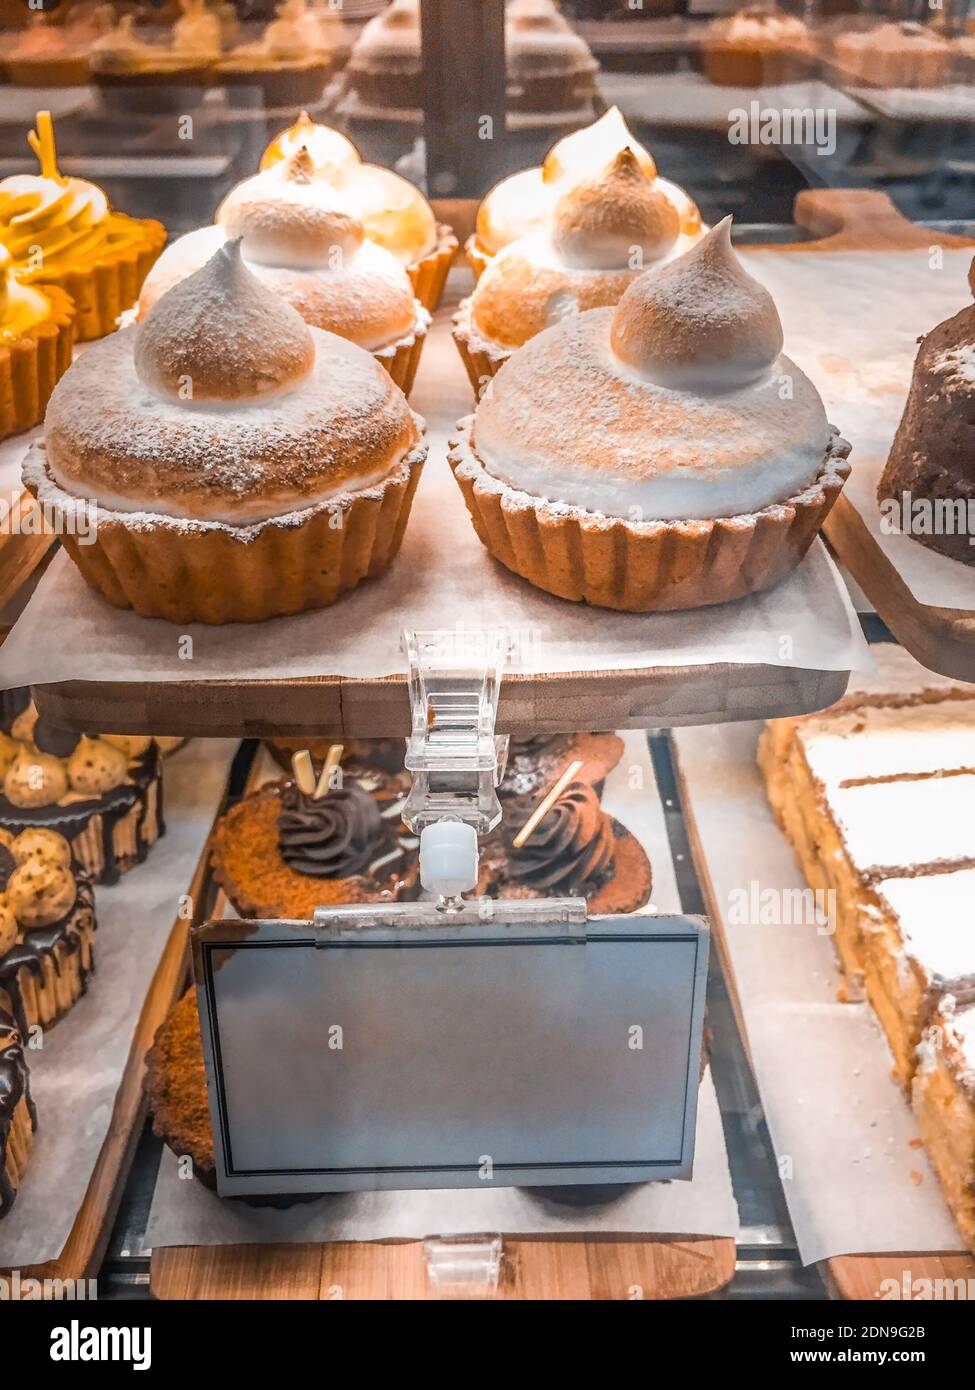 Close-up Of Dessert In Display Cabinet At Store Stock Photo